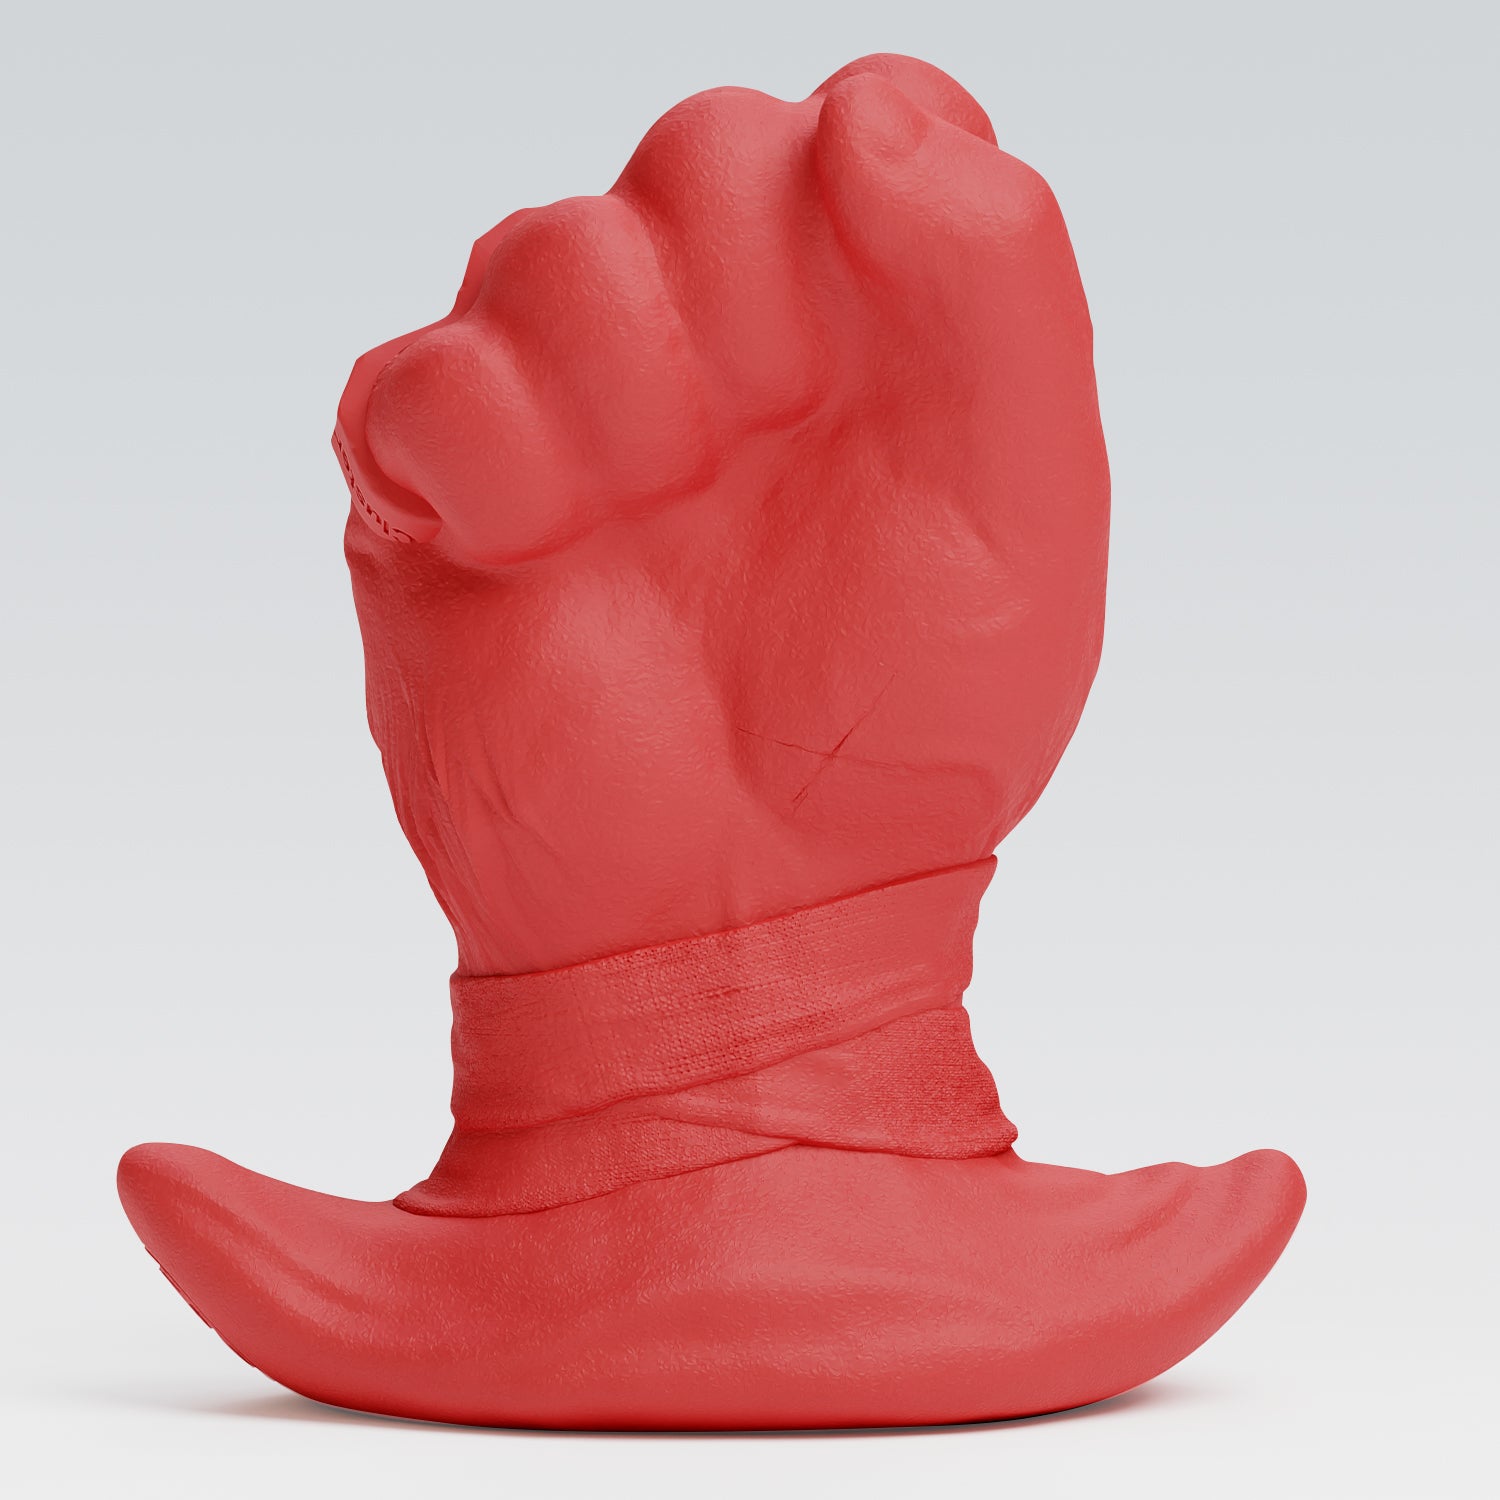 fist dildo,punch sex toys for anal fisting-red color